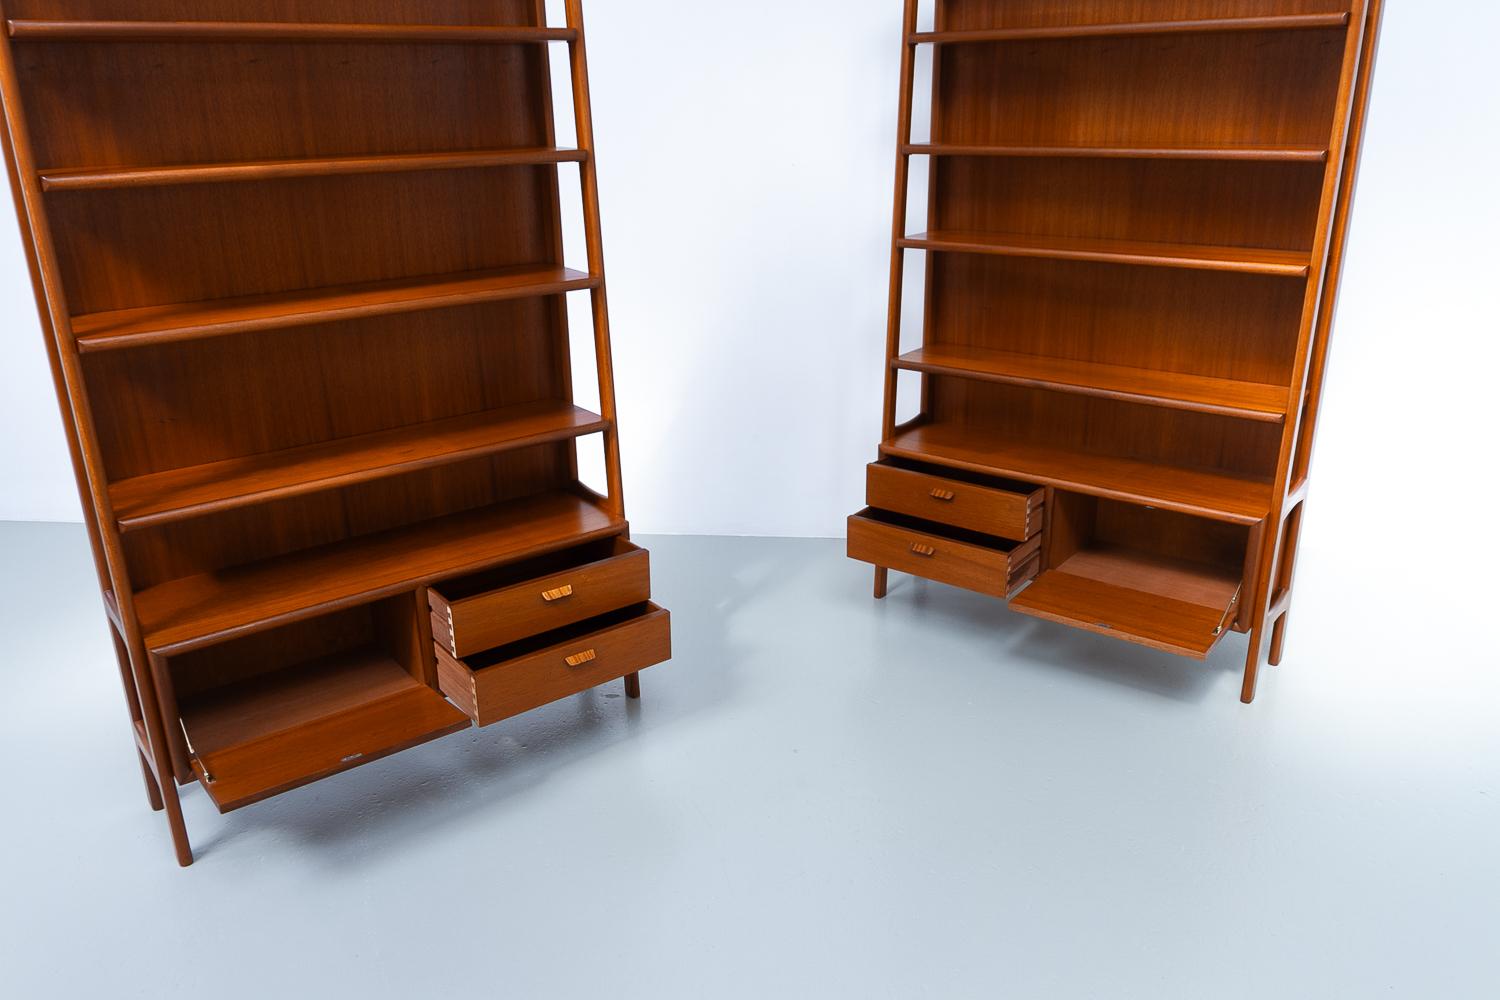 Danish Modern Mahogany Bookcases, 1960s. Set of 2. In Good Condition For Sale In Asaa, DK